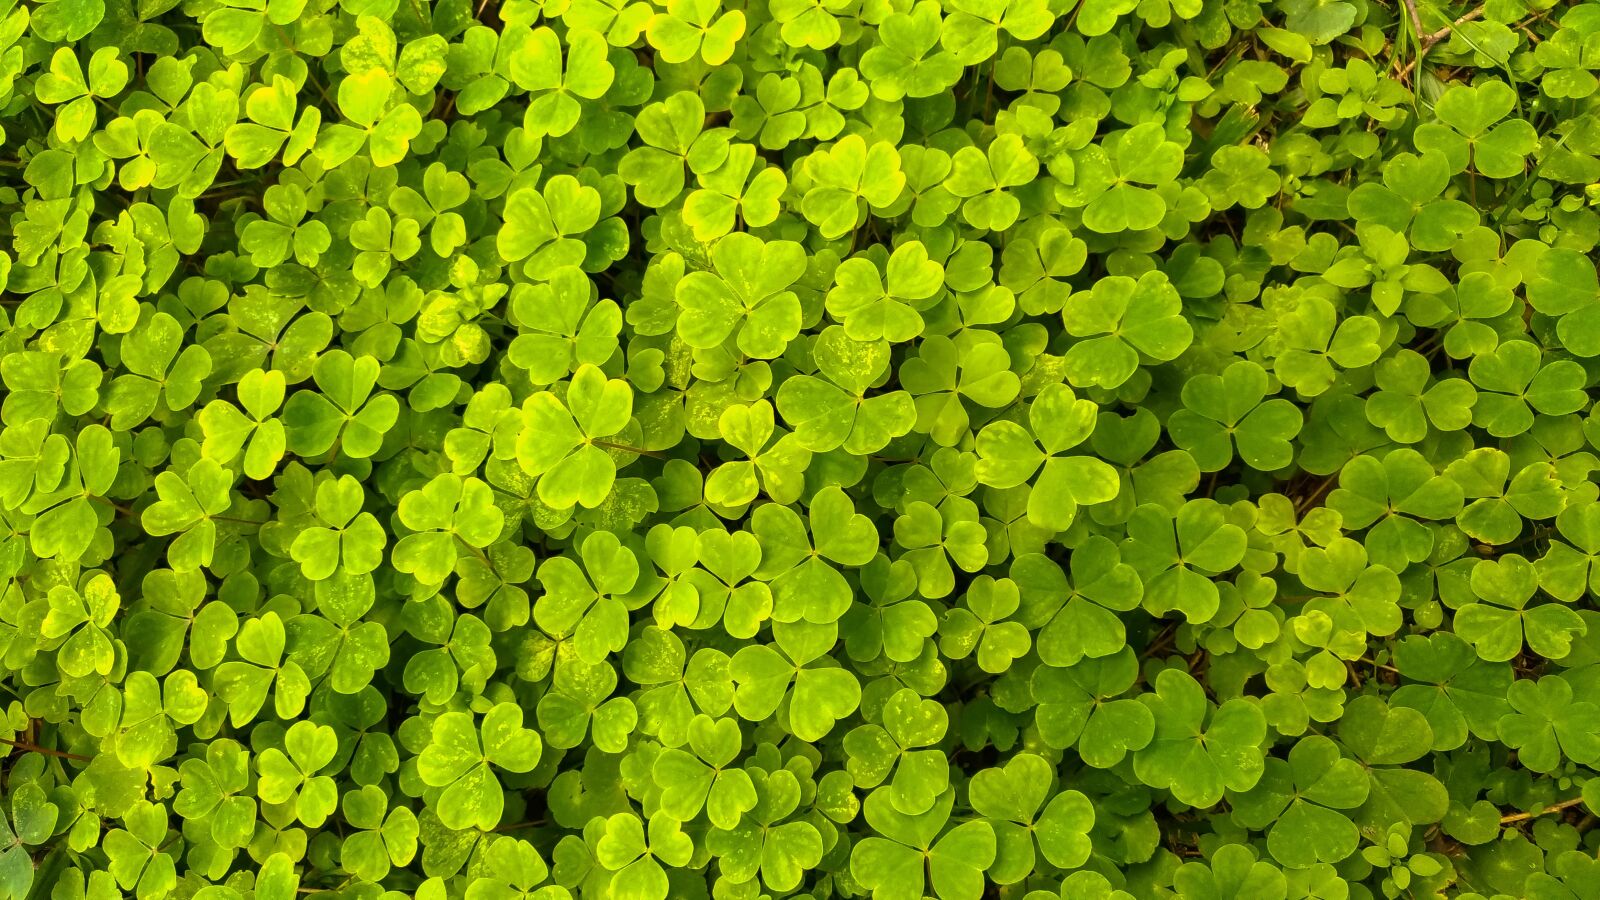 ASUS Z012DC sample photo. Clover, nature, green photography